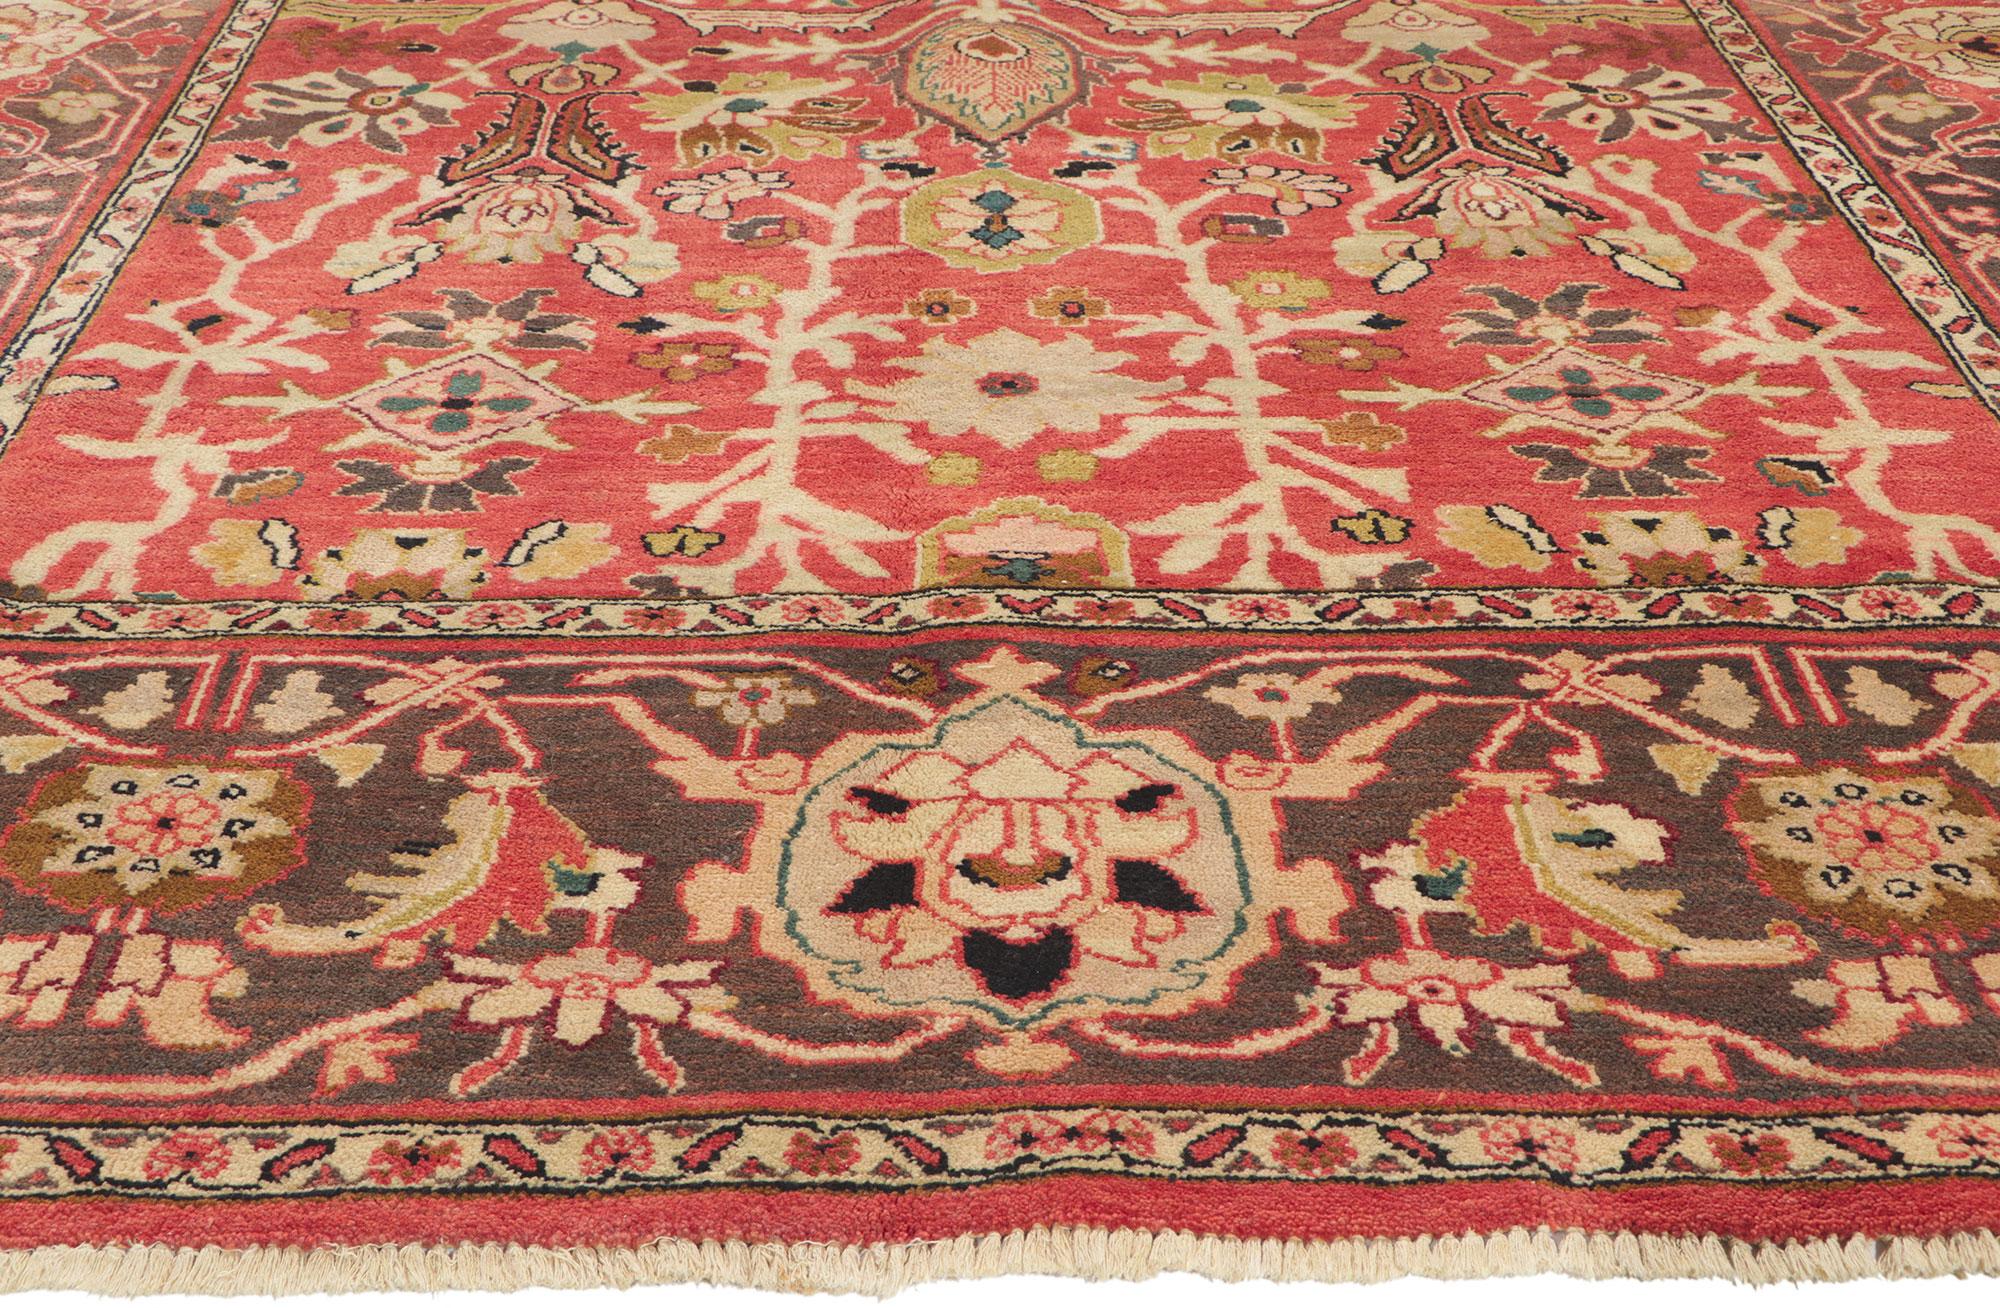 Vintage Indian Mahal Rug with Warm Earth-Tone Colors In Good Condition For Sale In Dallas, TX